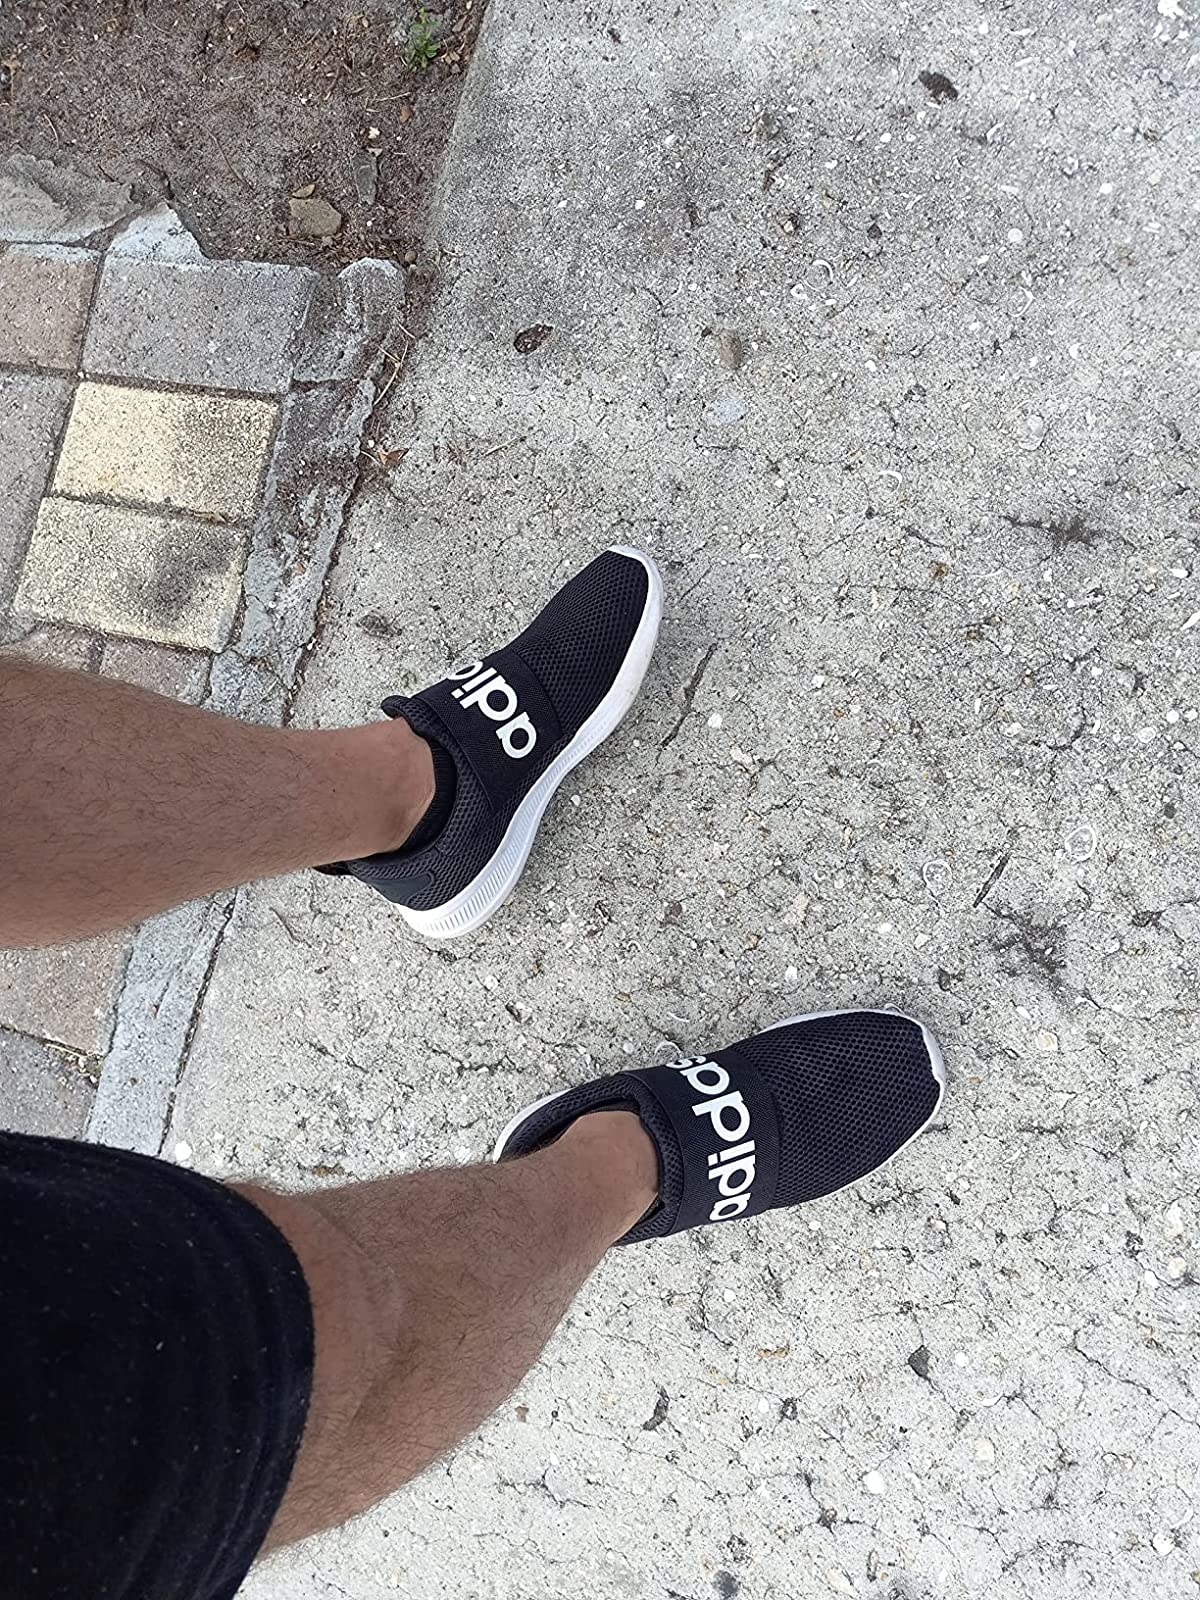 Reviewer wearing black slip on shoe with white adidas logo across front strap